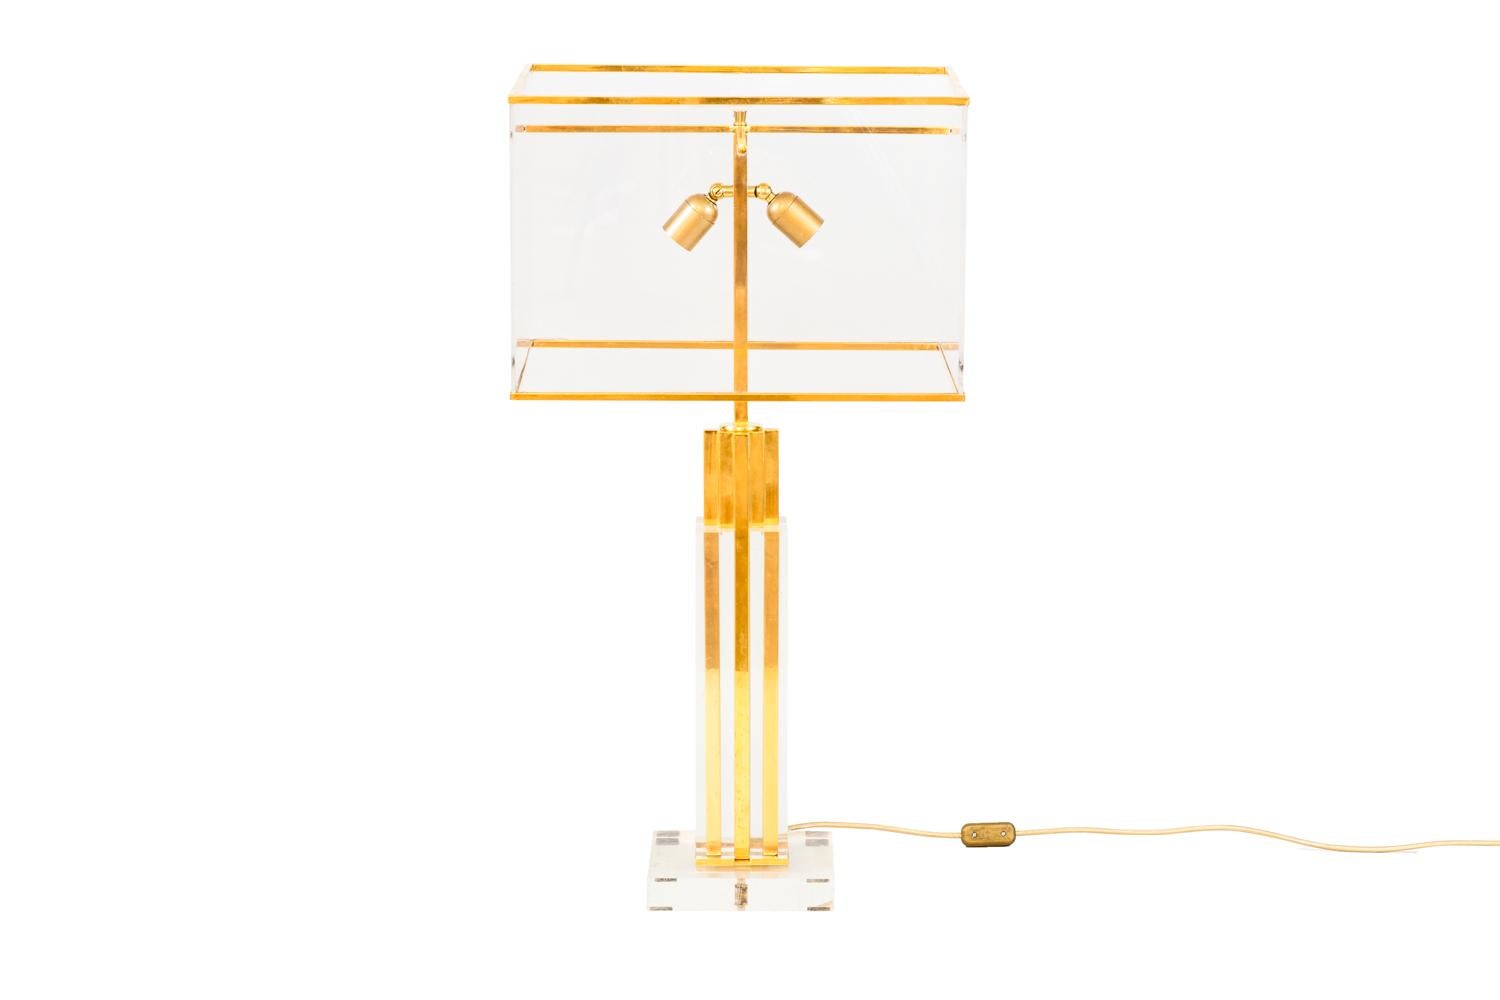 Romeo Rega, in the style of.
Column lamp standing on a Lucite square base. Gilt brass shaft framed by Lucite parts.
Rectangular lamp shade in Lucite with gilt brass support.

Work realized in the 1970s.

New and functional electrical